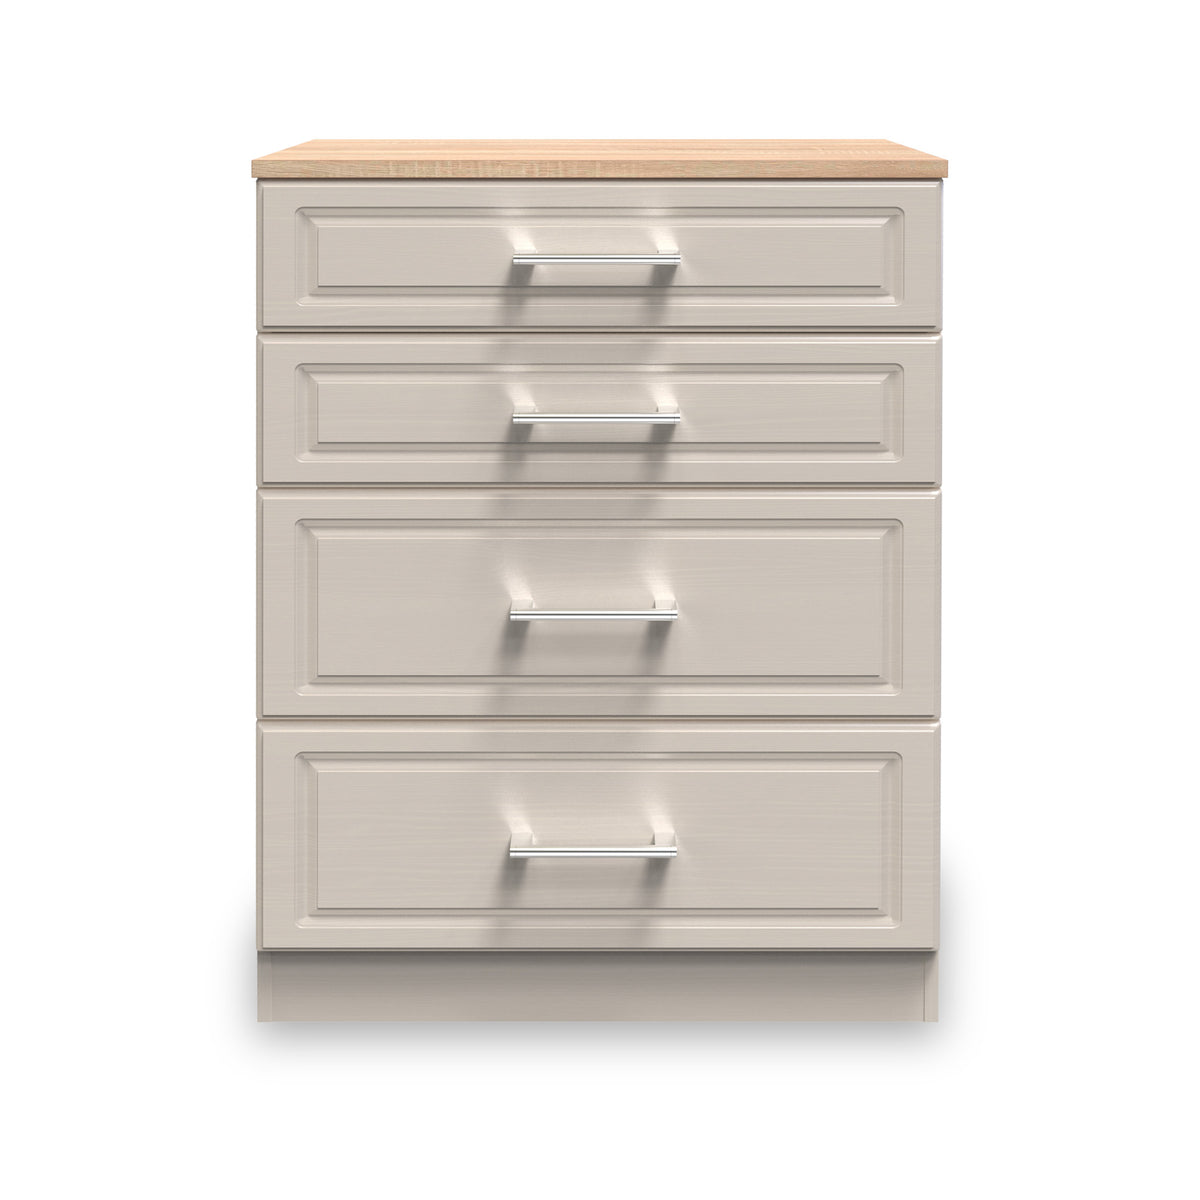 Talland Ash 4 Drawer Deep Chest by Roseland Furniture